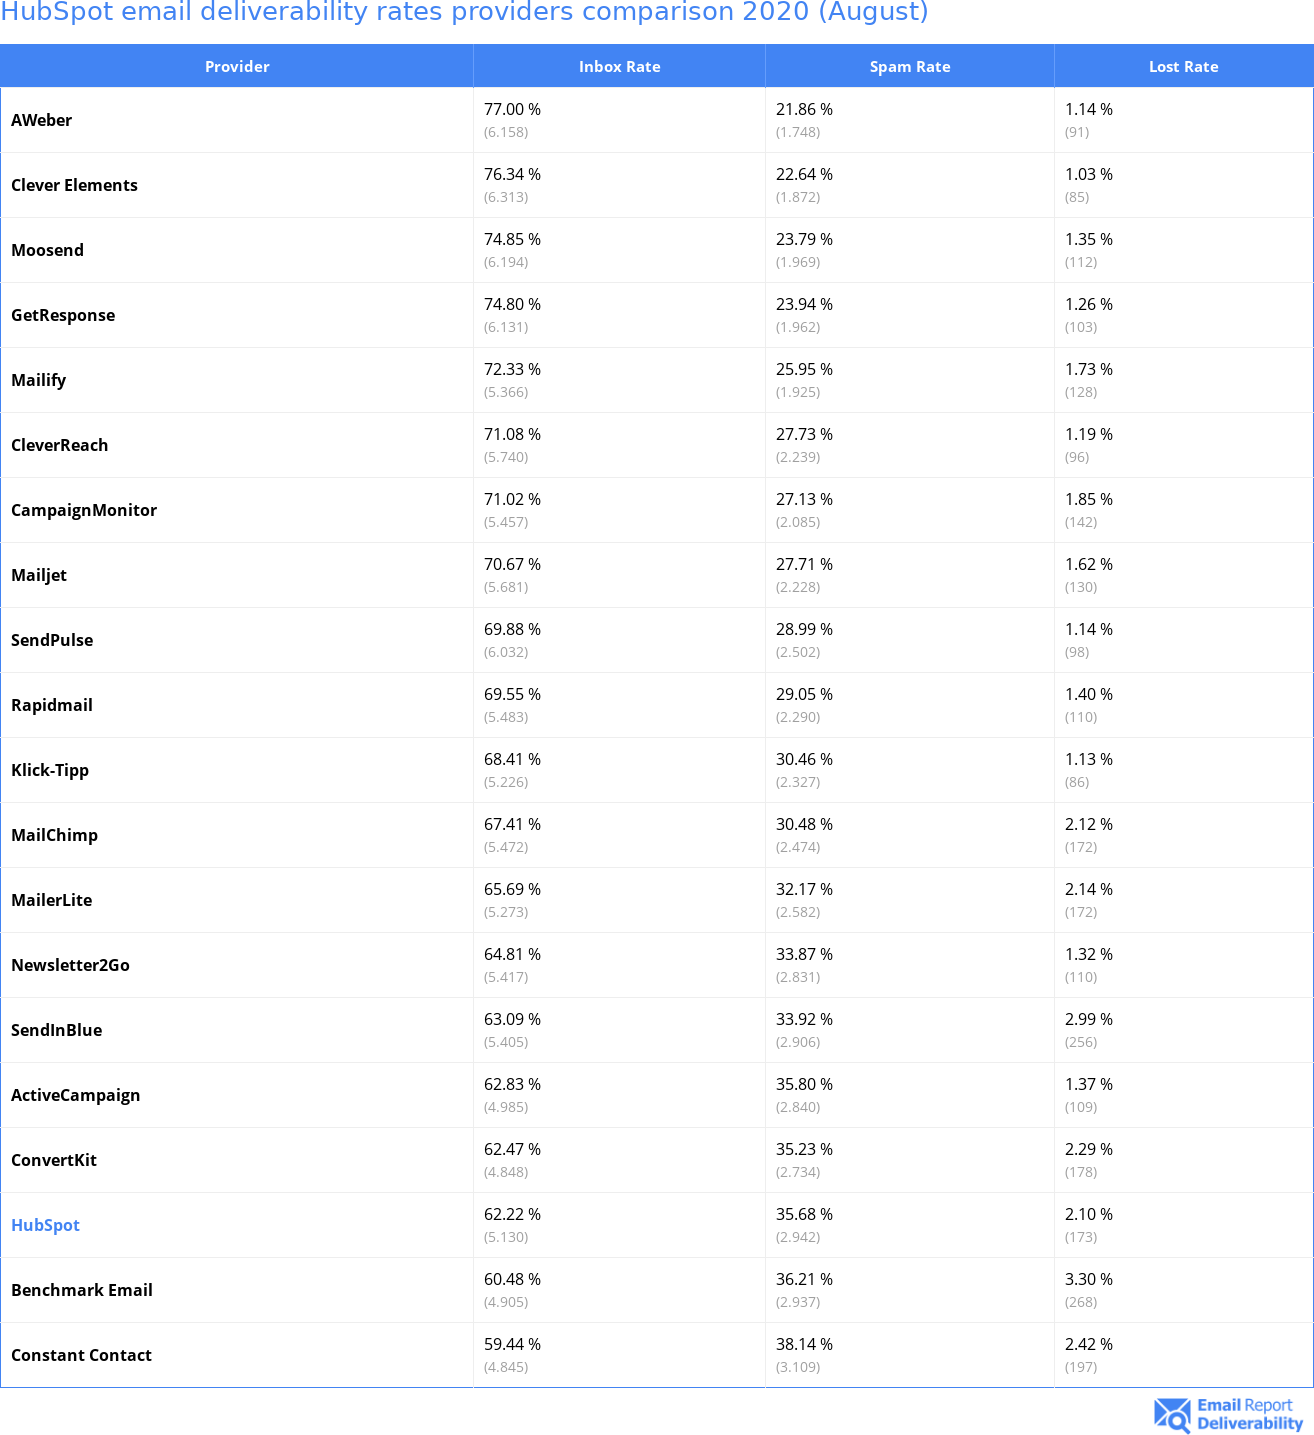 HubSpot email deliverability rates providers comparison 2020 (August)